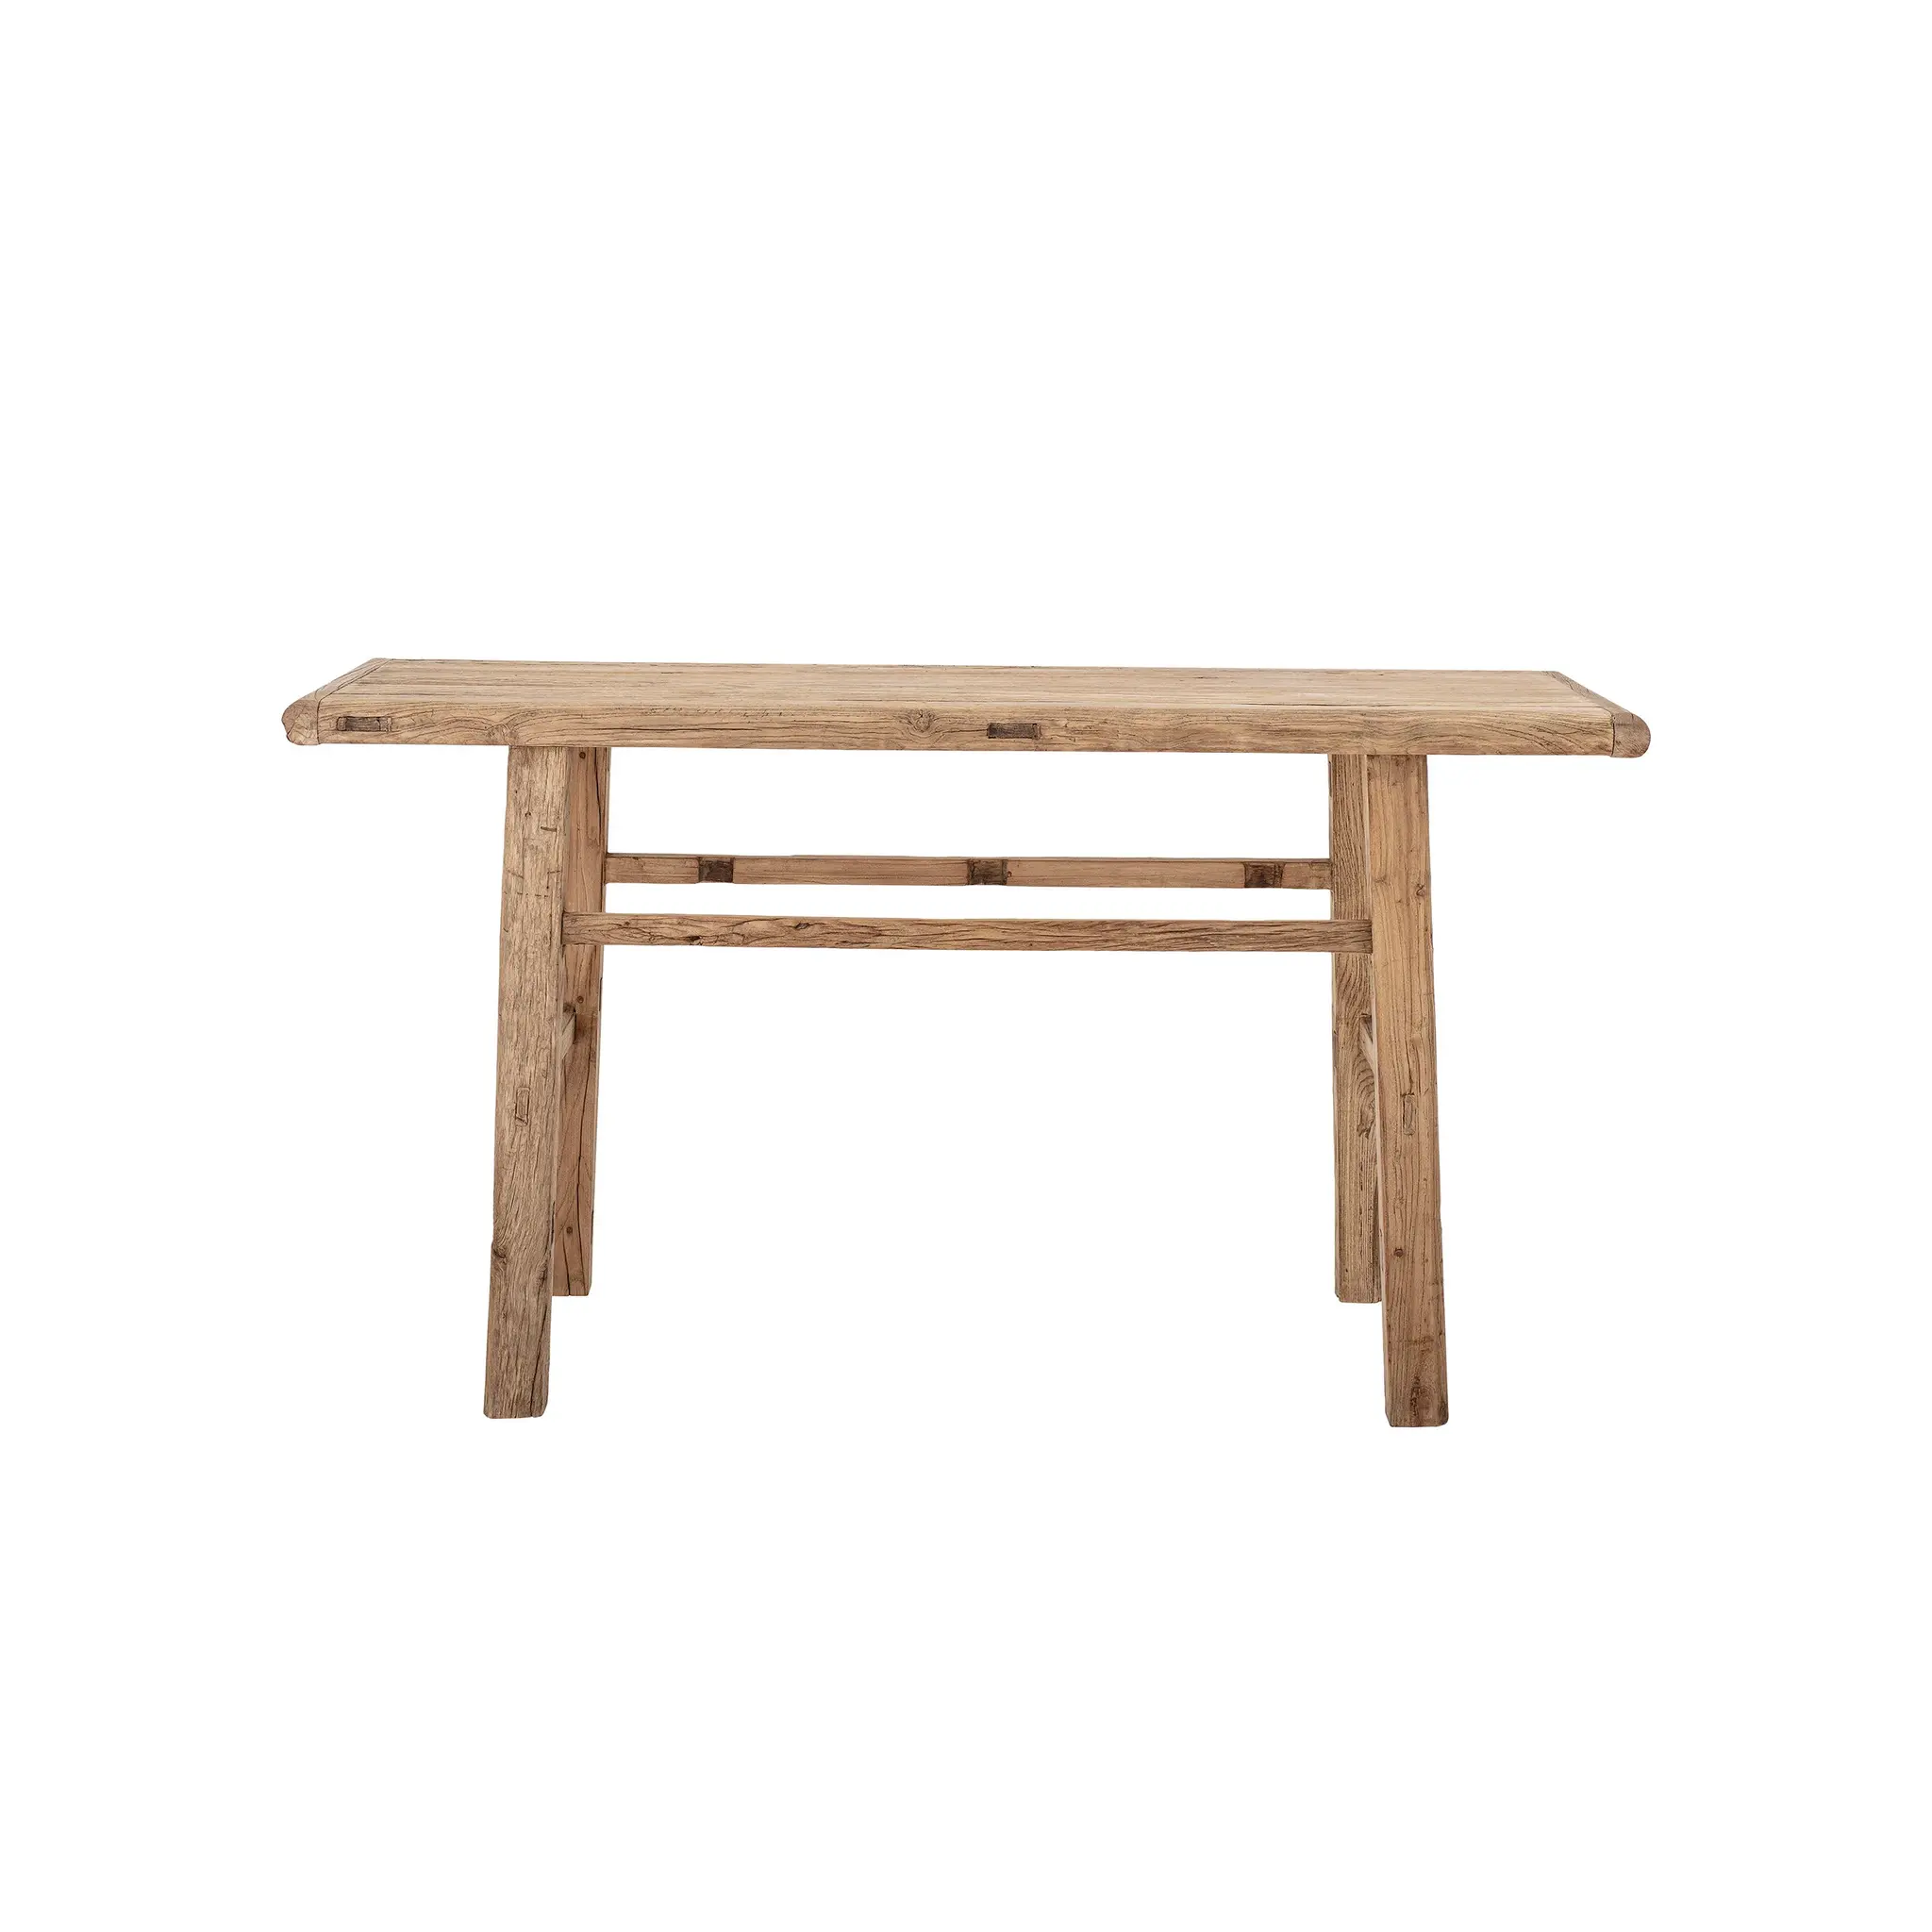  Bloomingville Reclaimed Wood Console Table, Natural : Home &  Kitchen